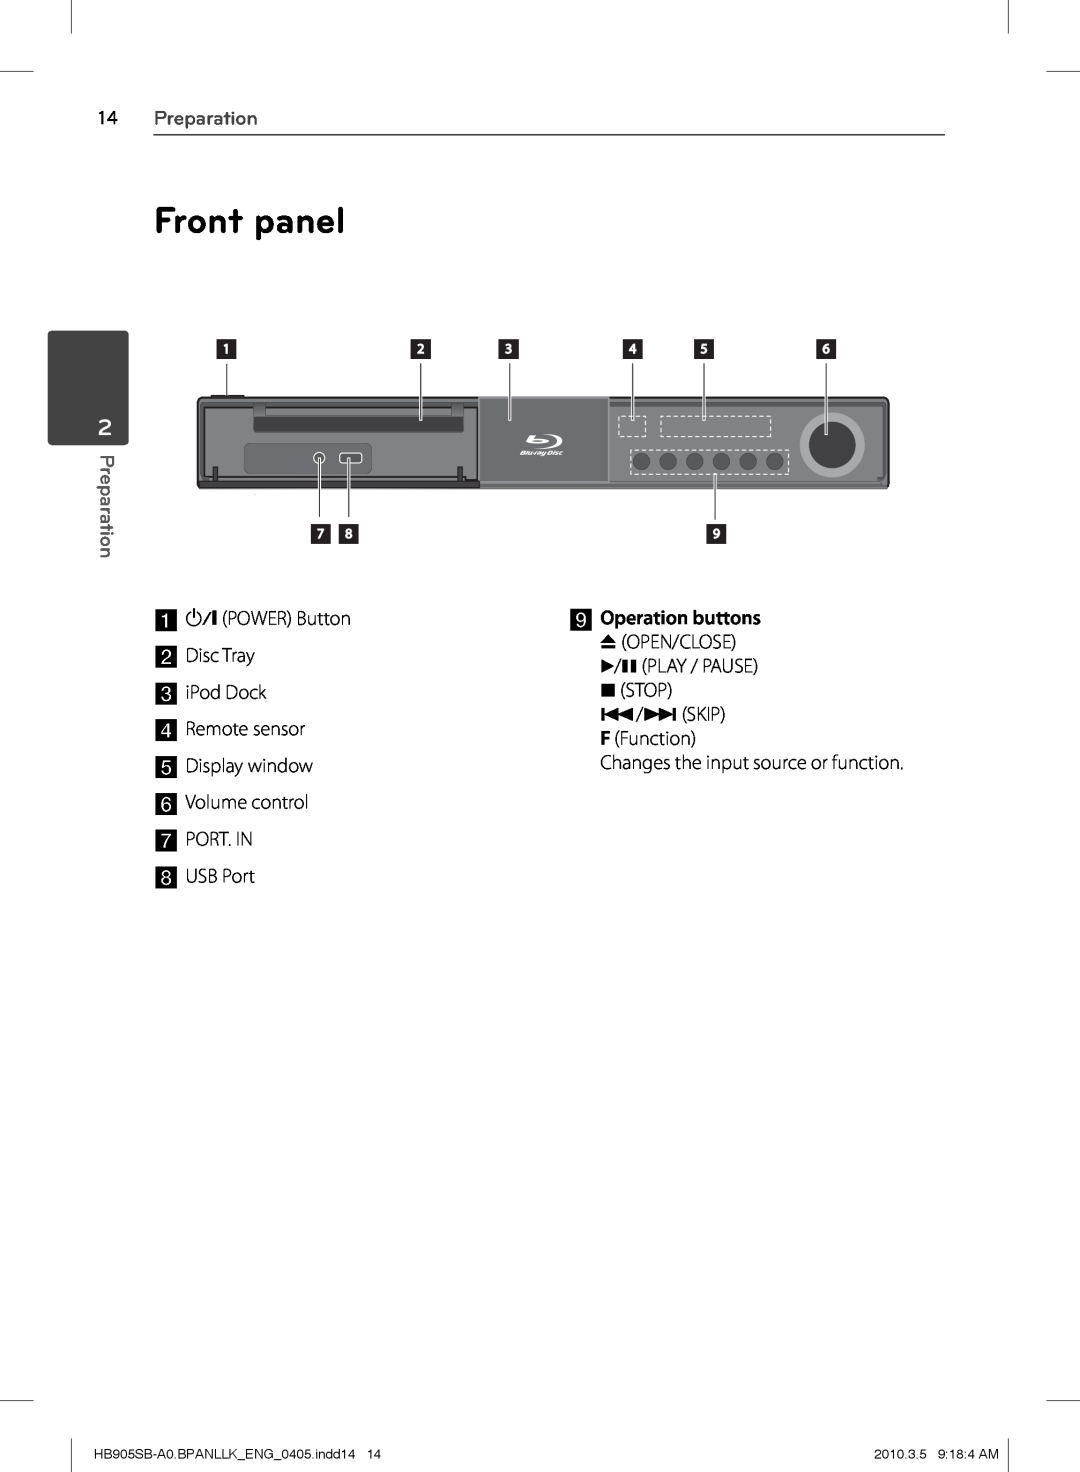 LG Electronics Front panel, 14Preparation, iOperation buttons, HB905SB-A0.BPANLLK ENG 0405.indd1414, 2010.3.5 9 18 4 AM 